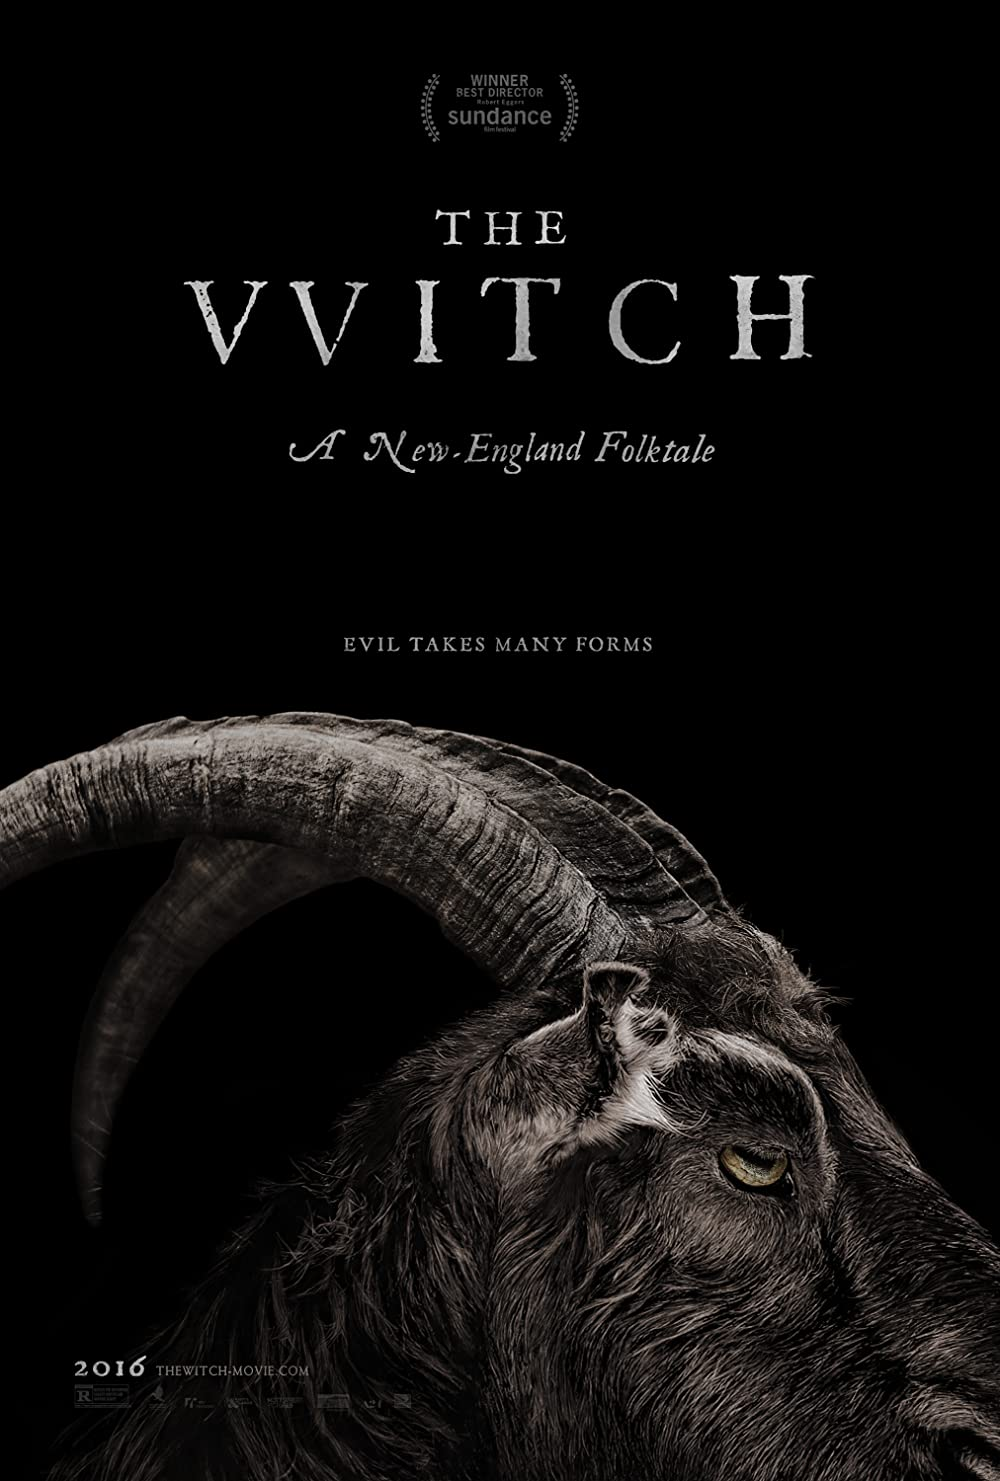 Best Supernatural Horror Movies: The Witch